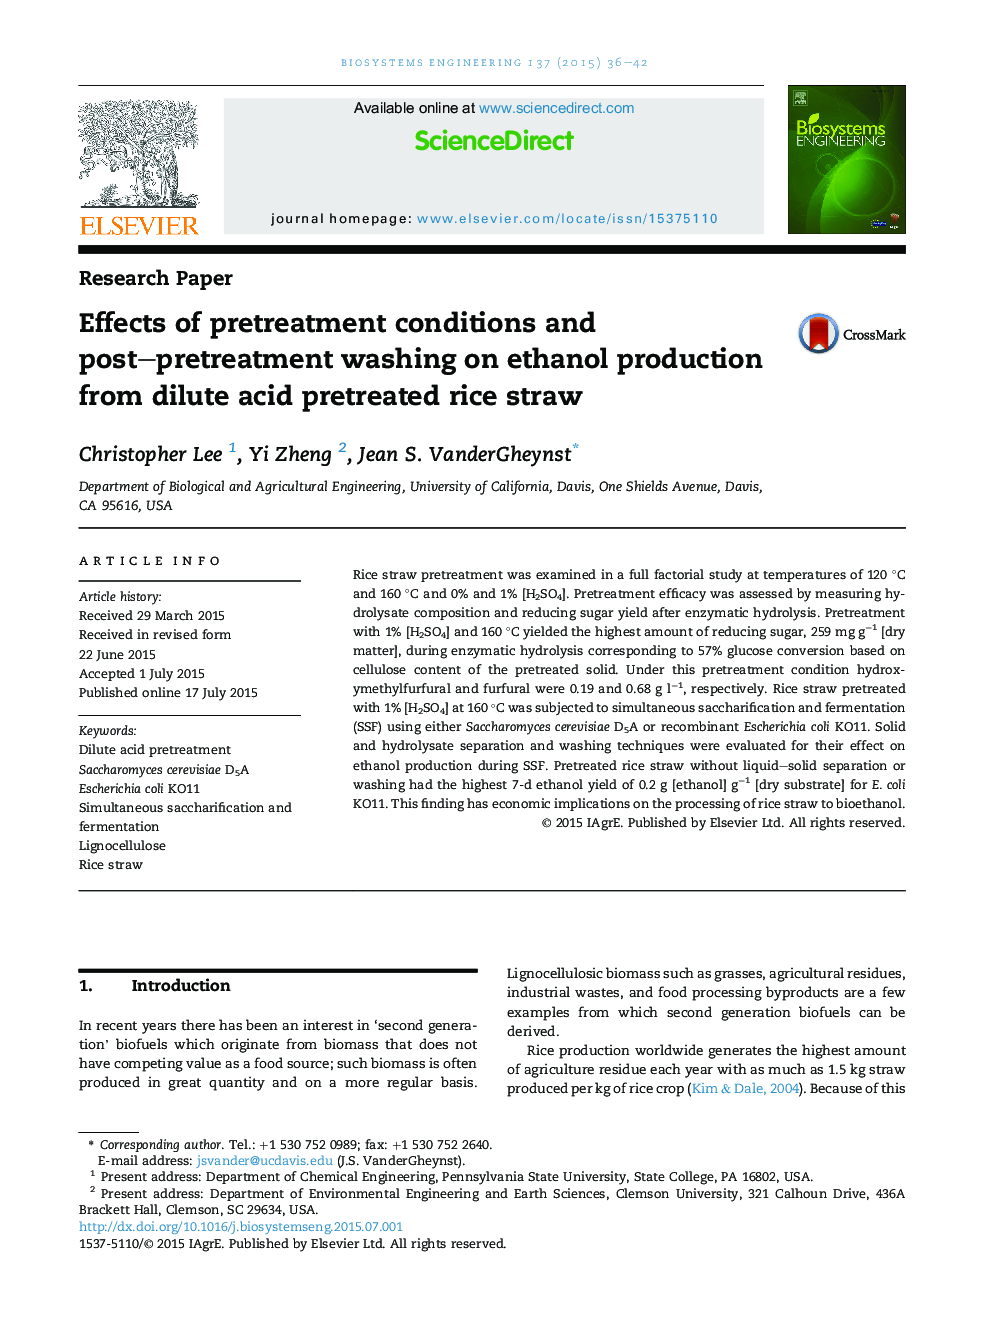 Effects of pretreatment conditions and post–pretreatment washing on ethanol production from dilute acid pretreated rice straw